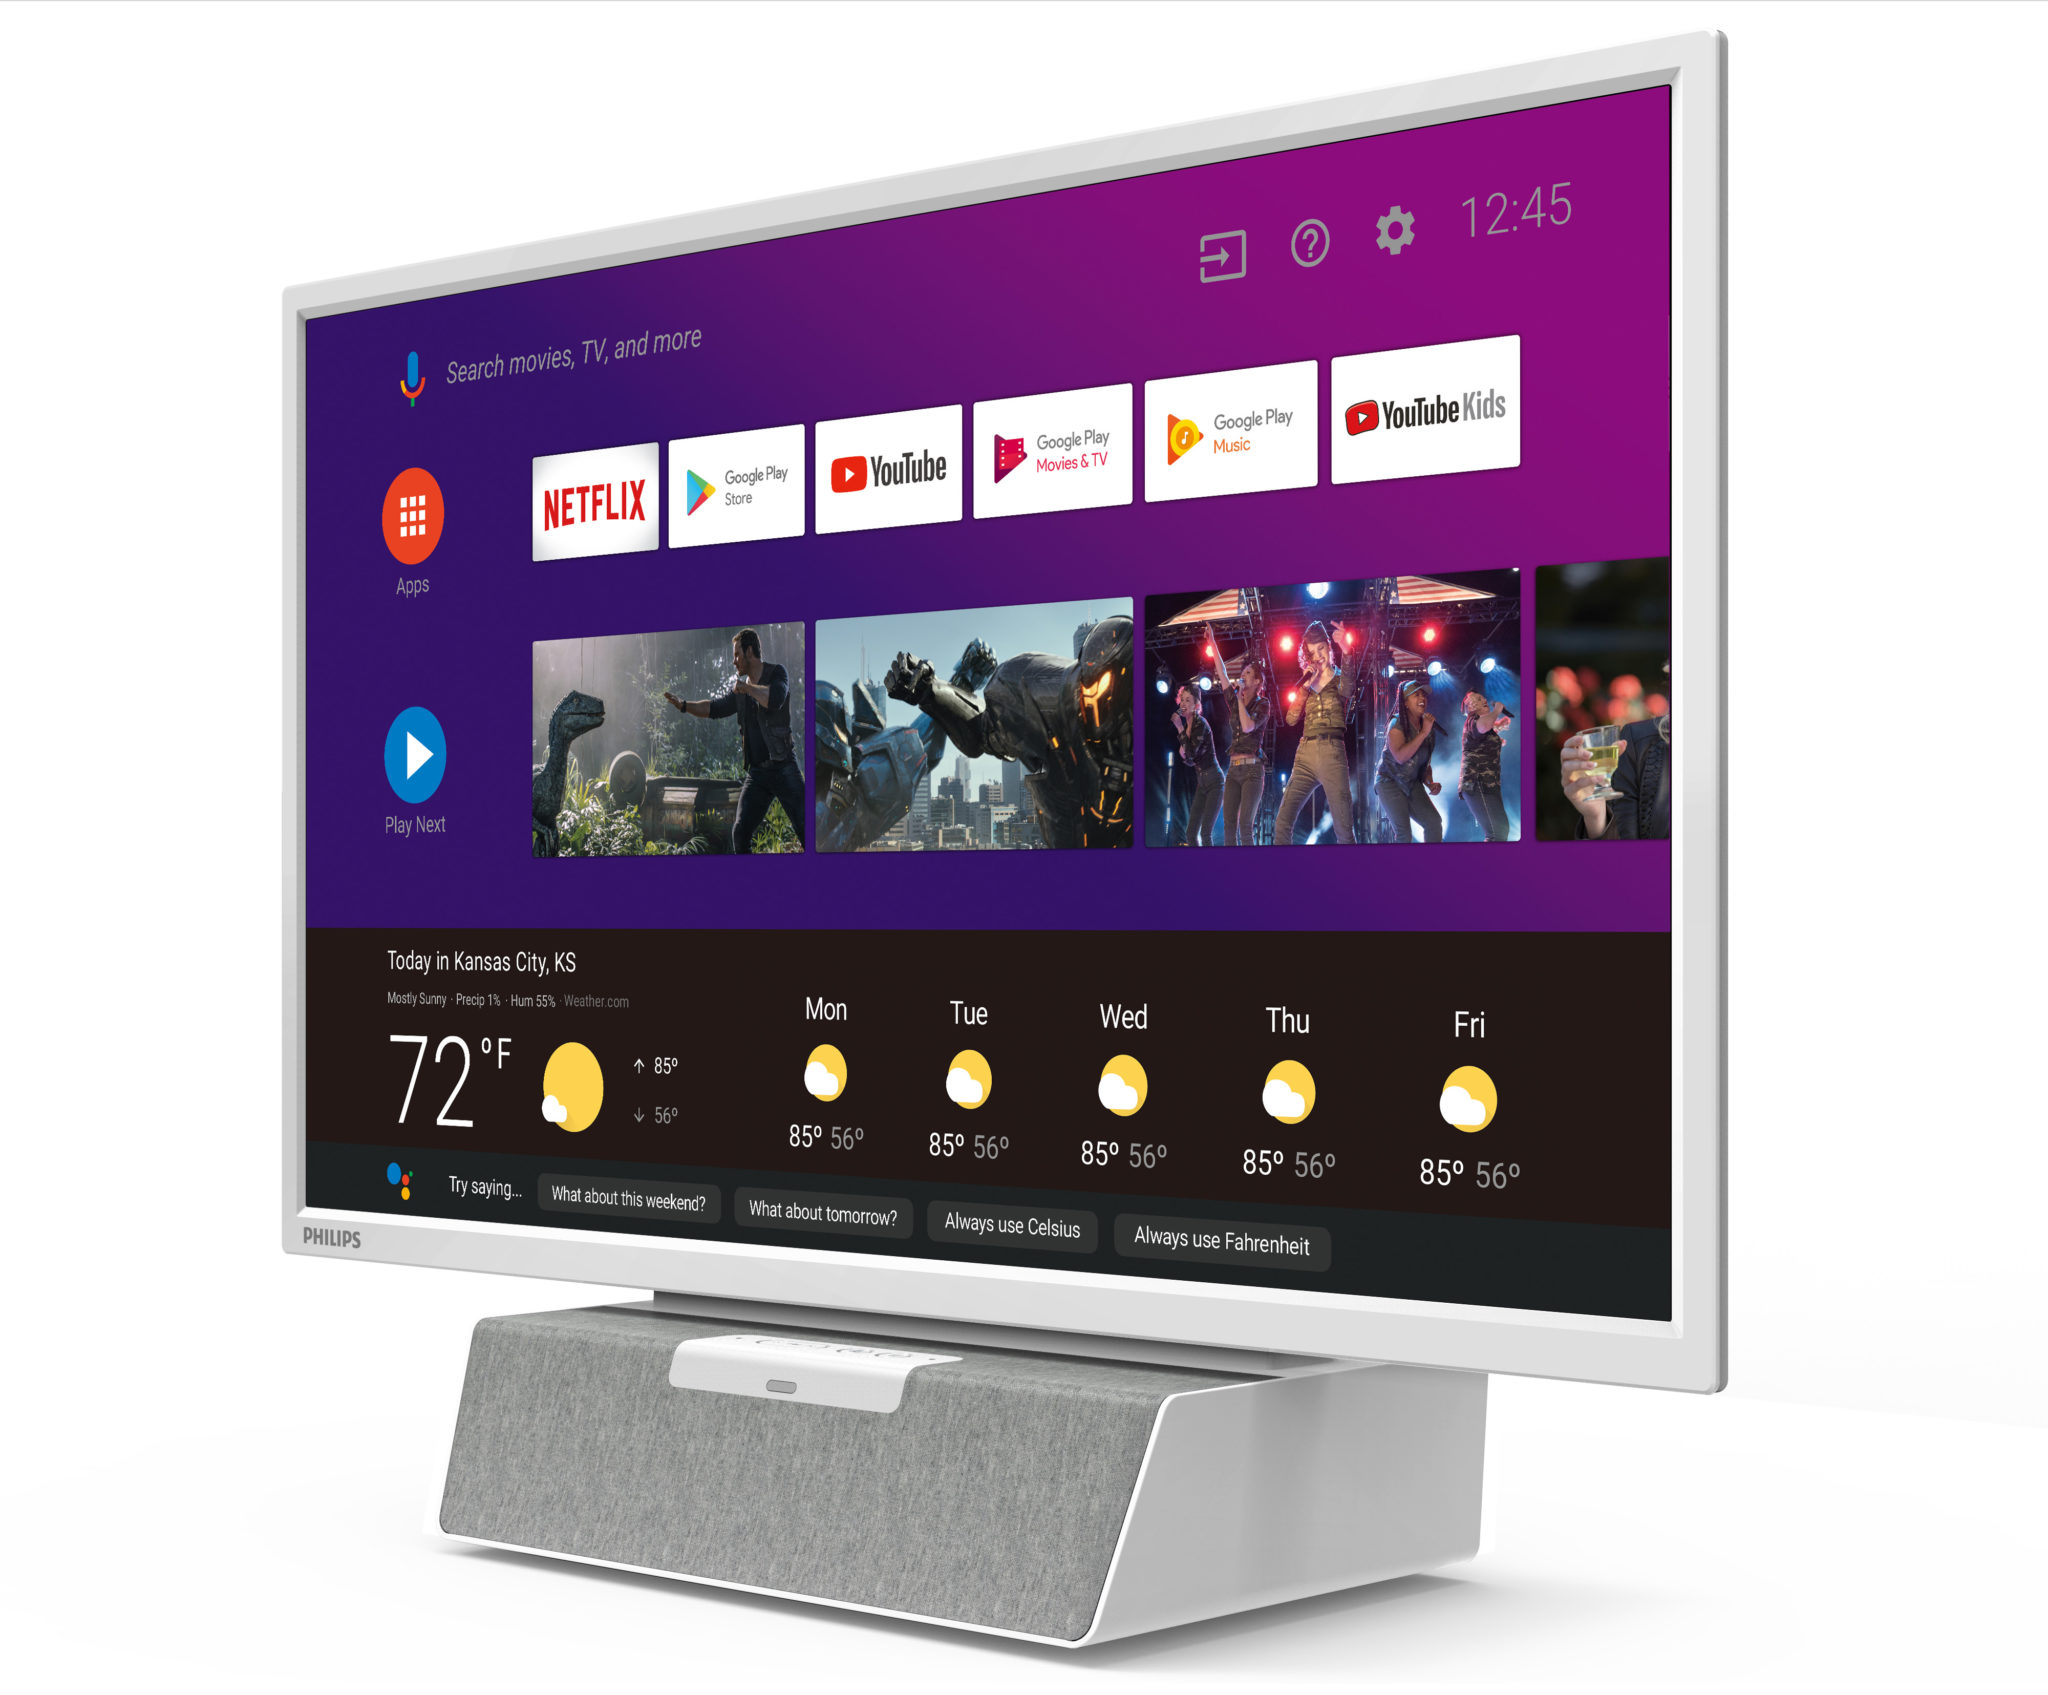 Philips Just Built an Android TV Smart TV Made For The Kitchen